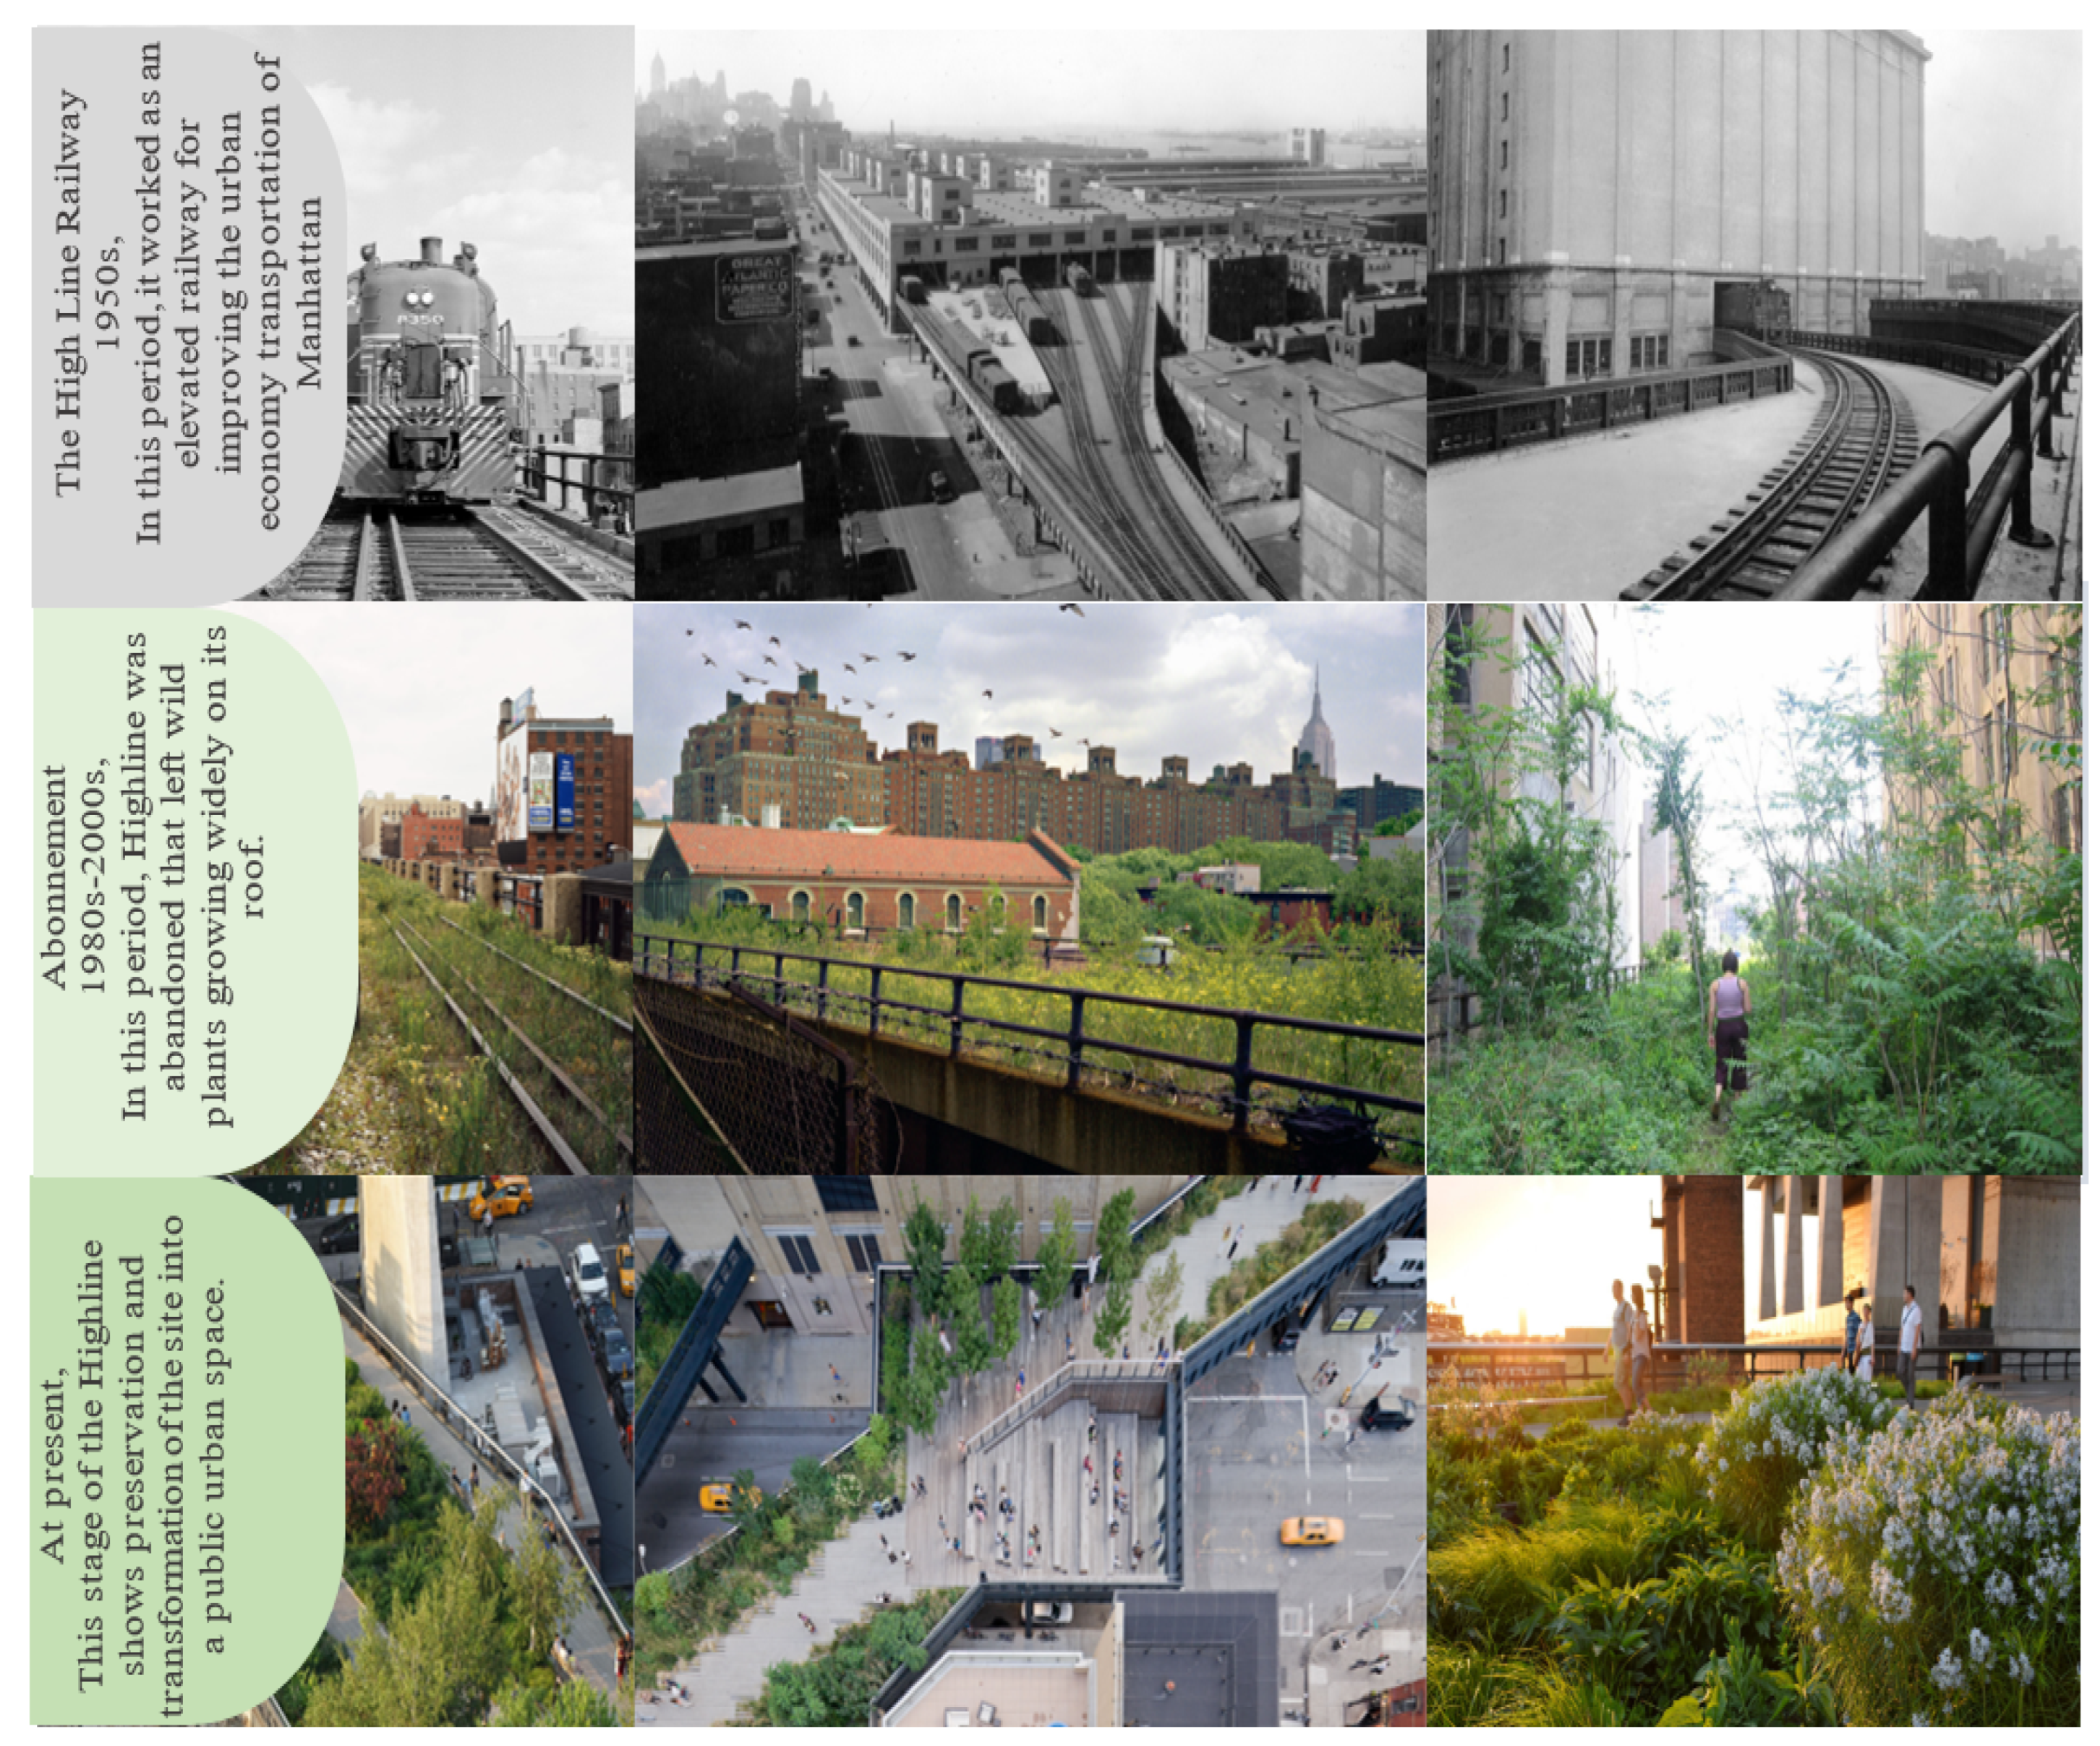 Urban Science | Free Full-Text | Lessons from New York High Line Green  Roof: Conserving Biodiversity and Reconnecting with Nature